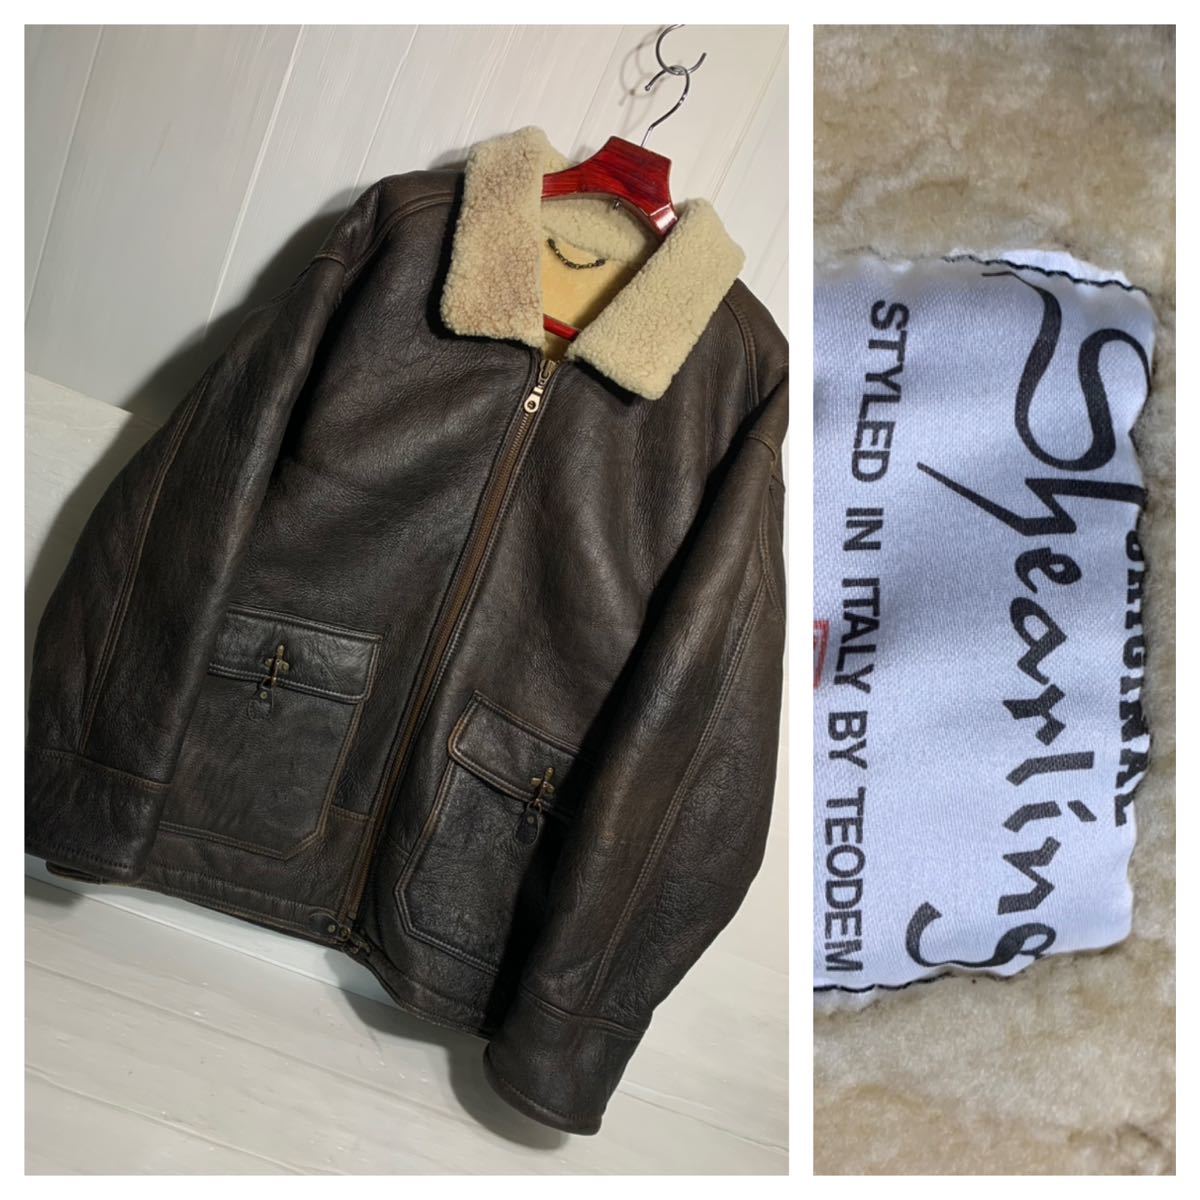 ORIGINAL Shearling STYLED IN ITALY BY TEODEM テオデム　イタリア製？　羊毛皮　B-3風　ムートン　レザーフライトジャケット　焦げ茶　XL